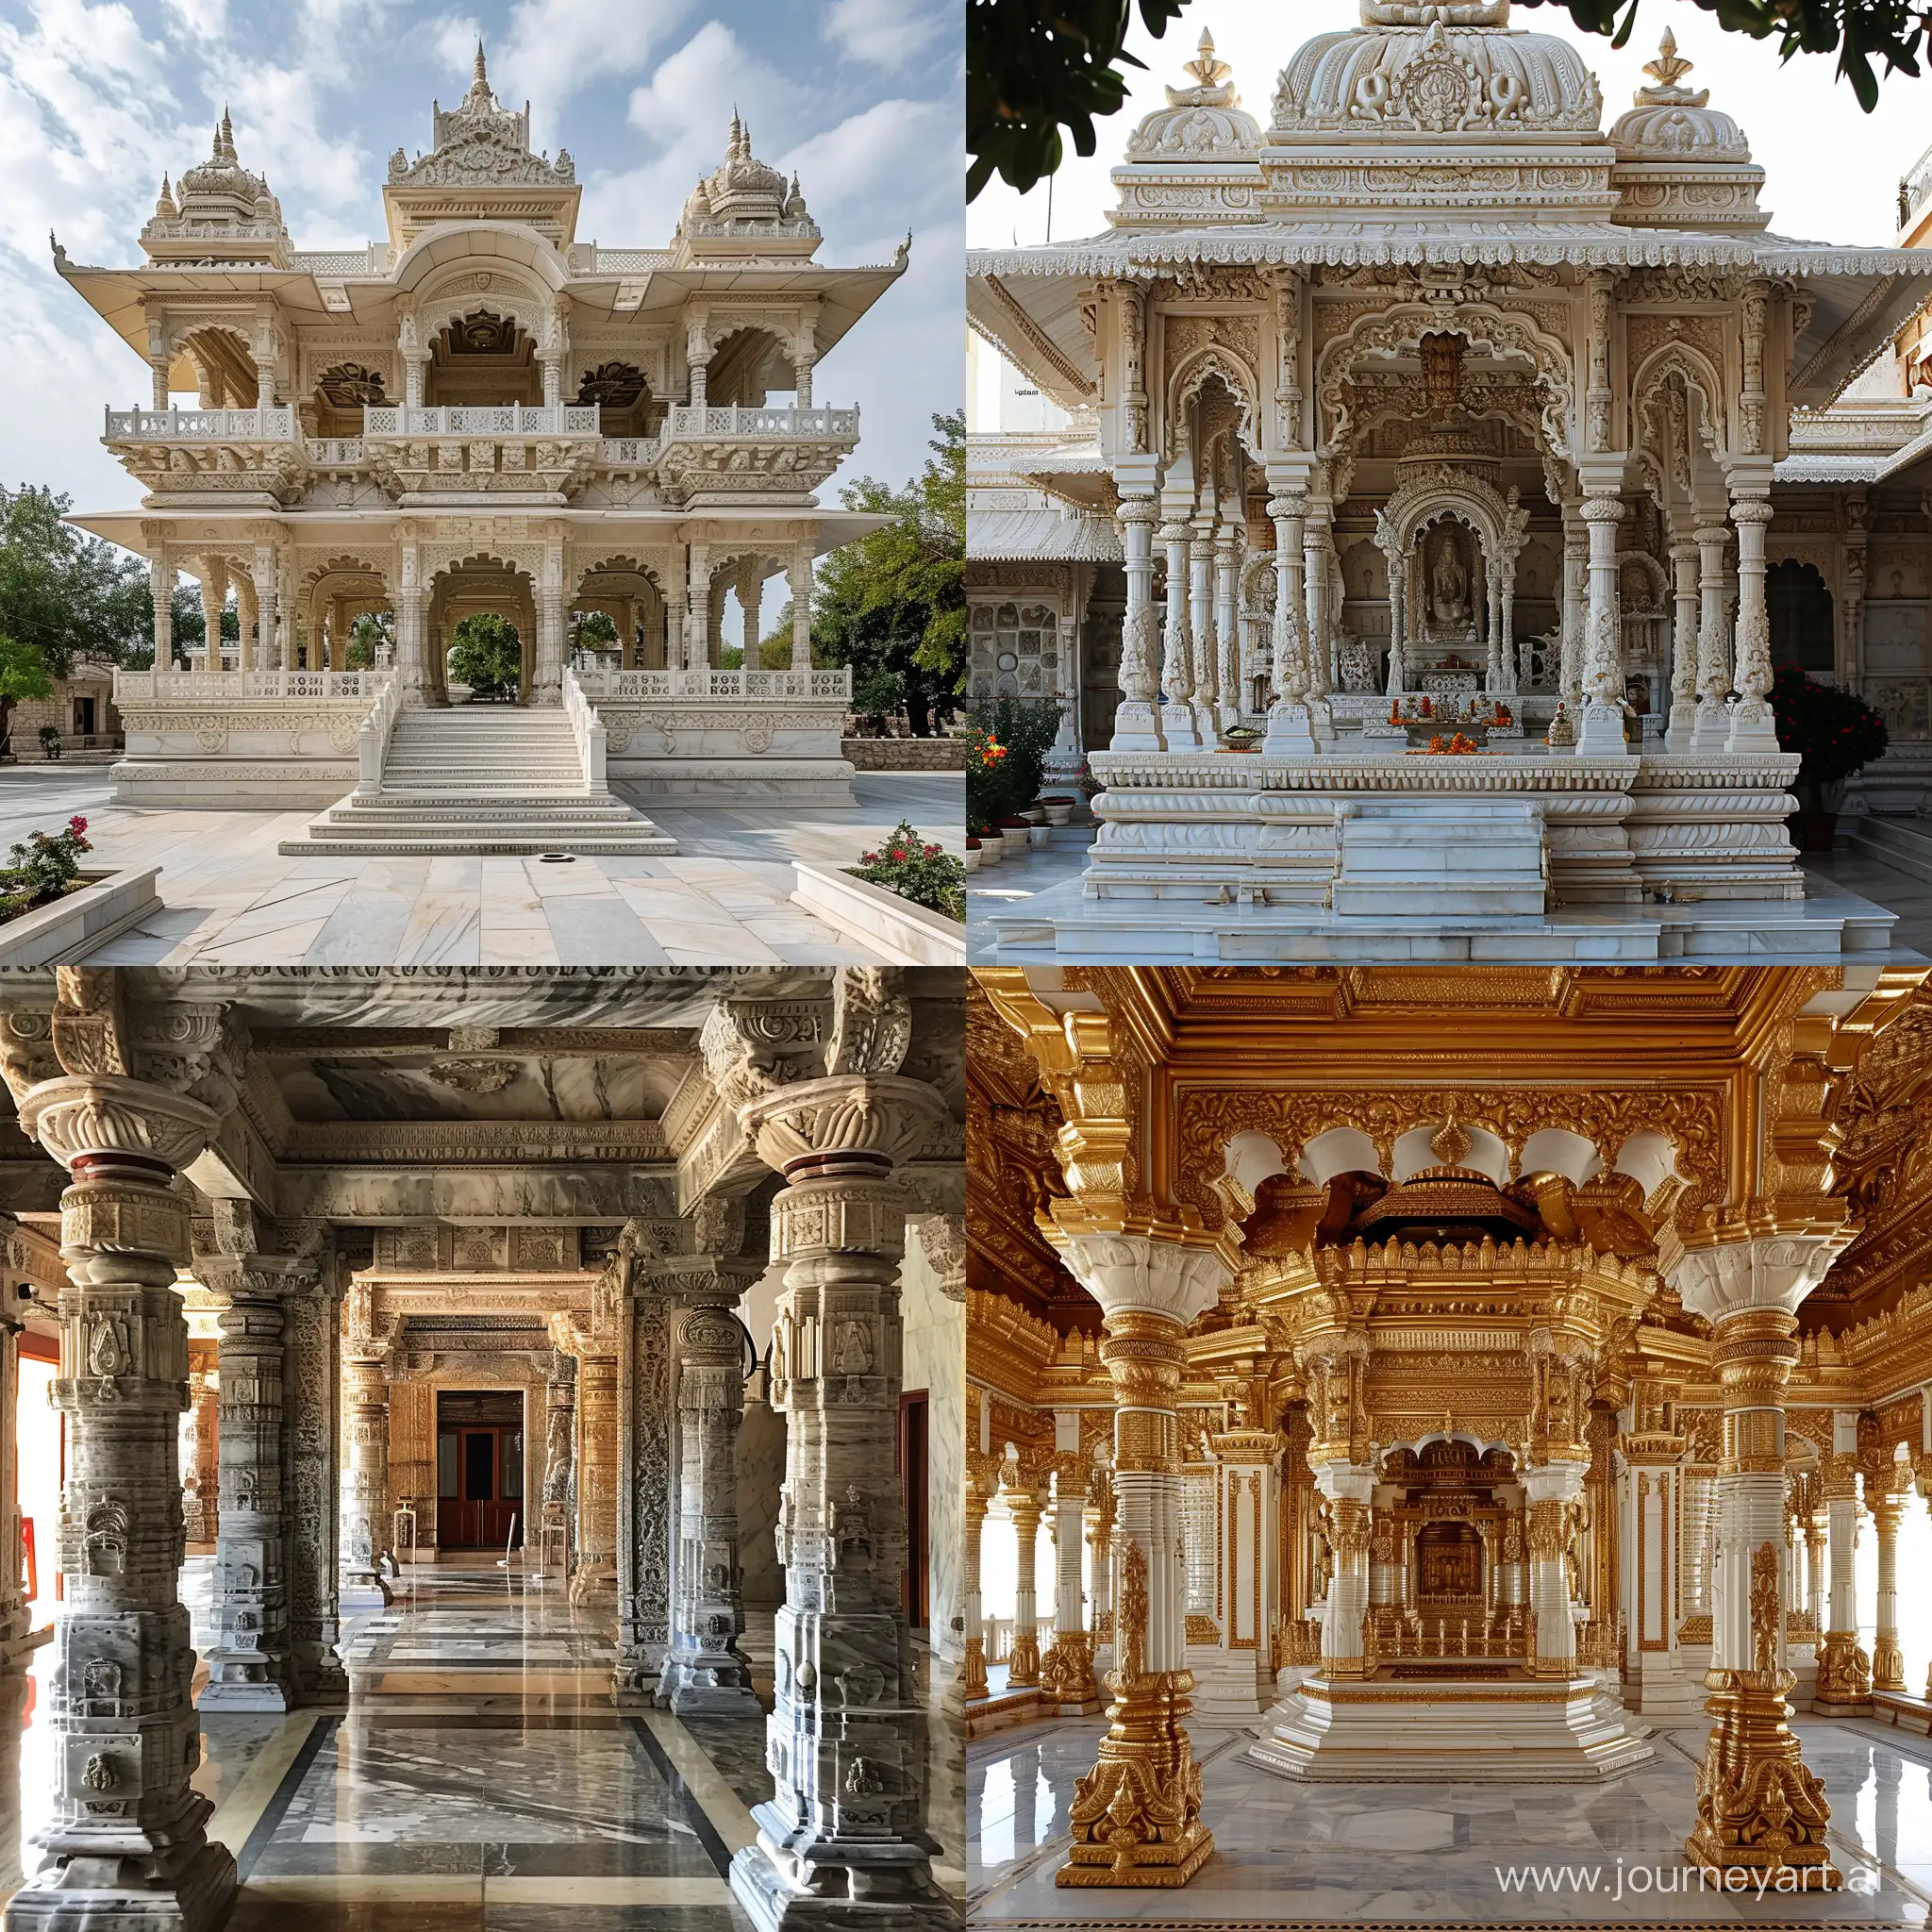 Jain-Temple-Artwork-with-Unique-Perspective-and-Symmetry